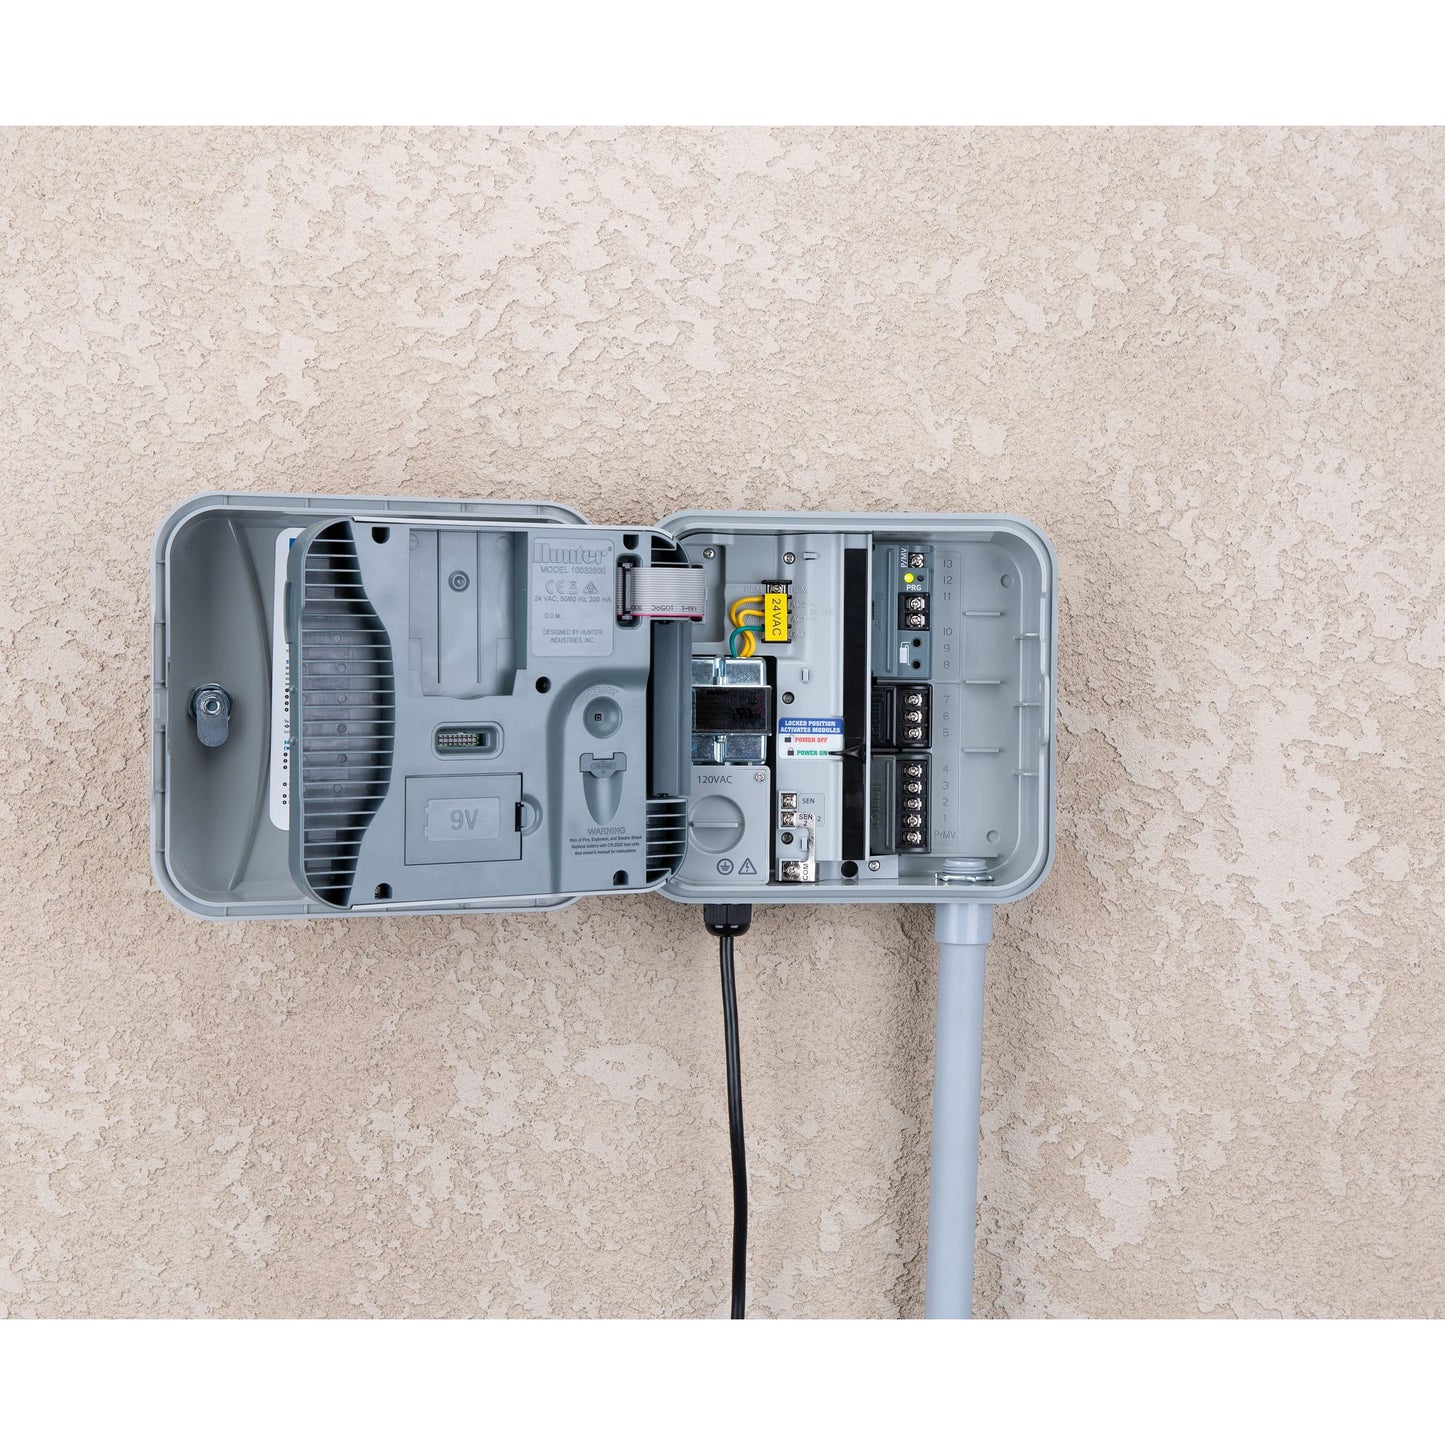 P2C-400 - Pro-C Irrigation Controller with Wall Mount Cabinet - 4 Station / Expandable to 32